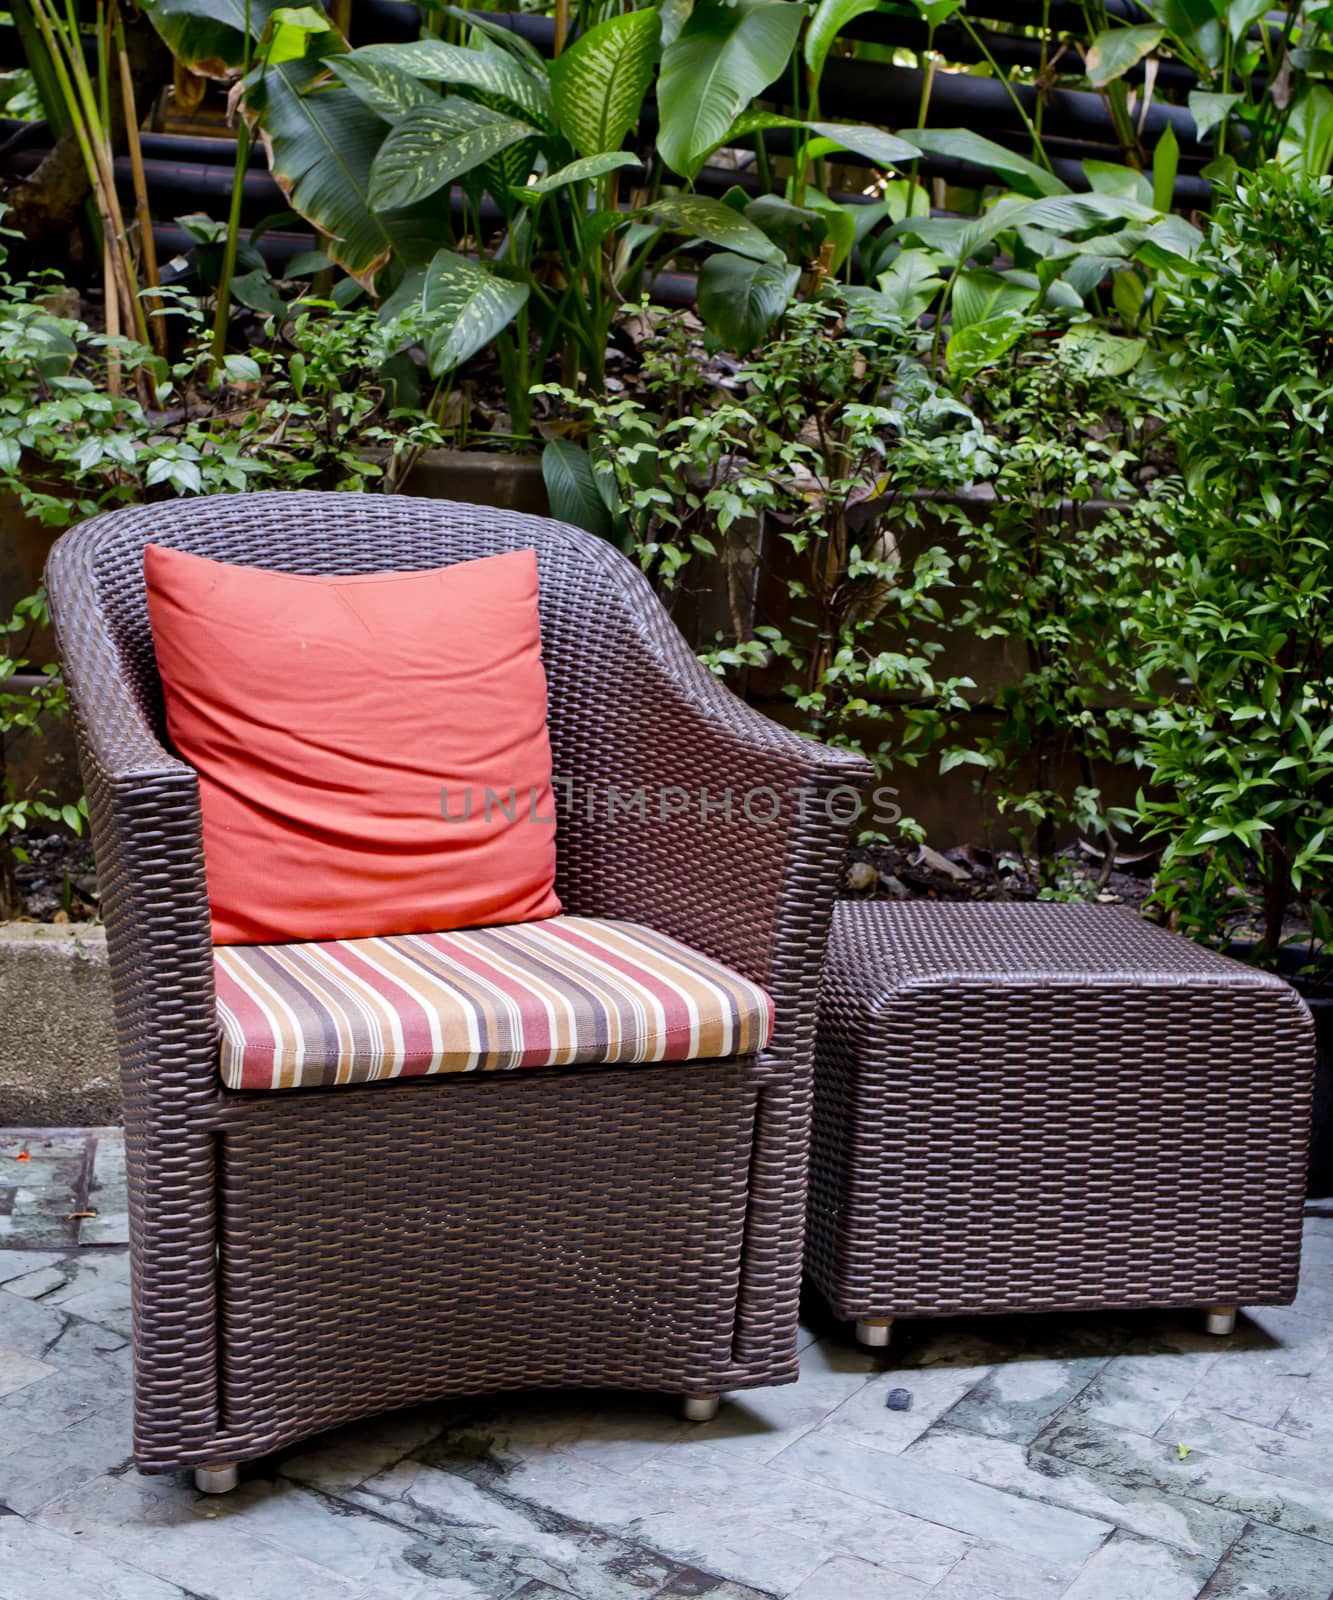 Rattan chair and rattan coffee table with green trees at outdoor